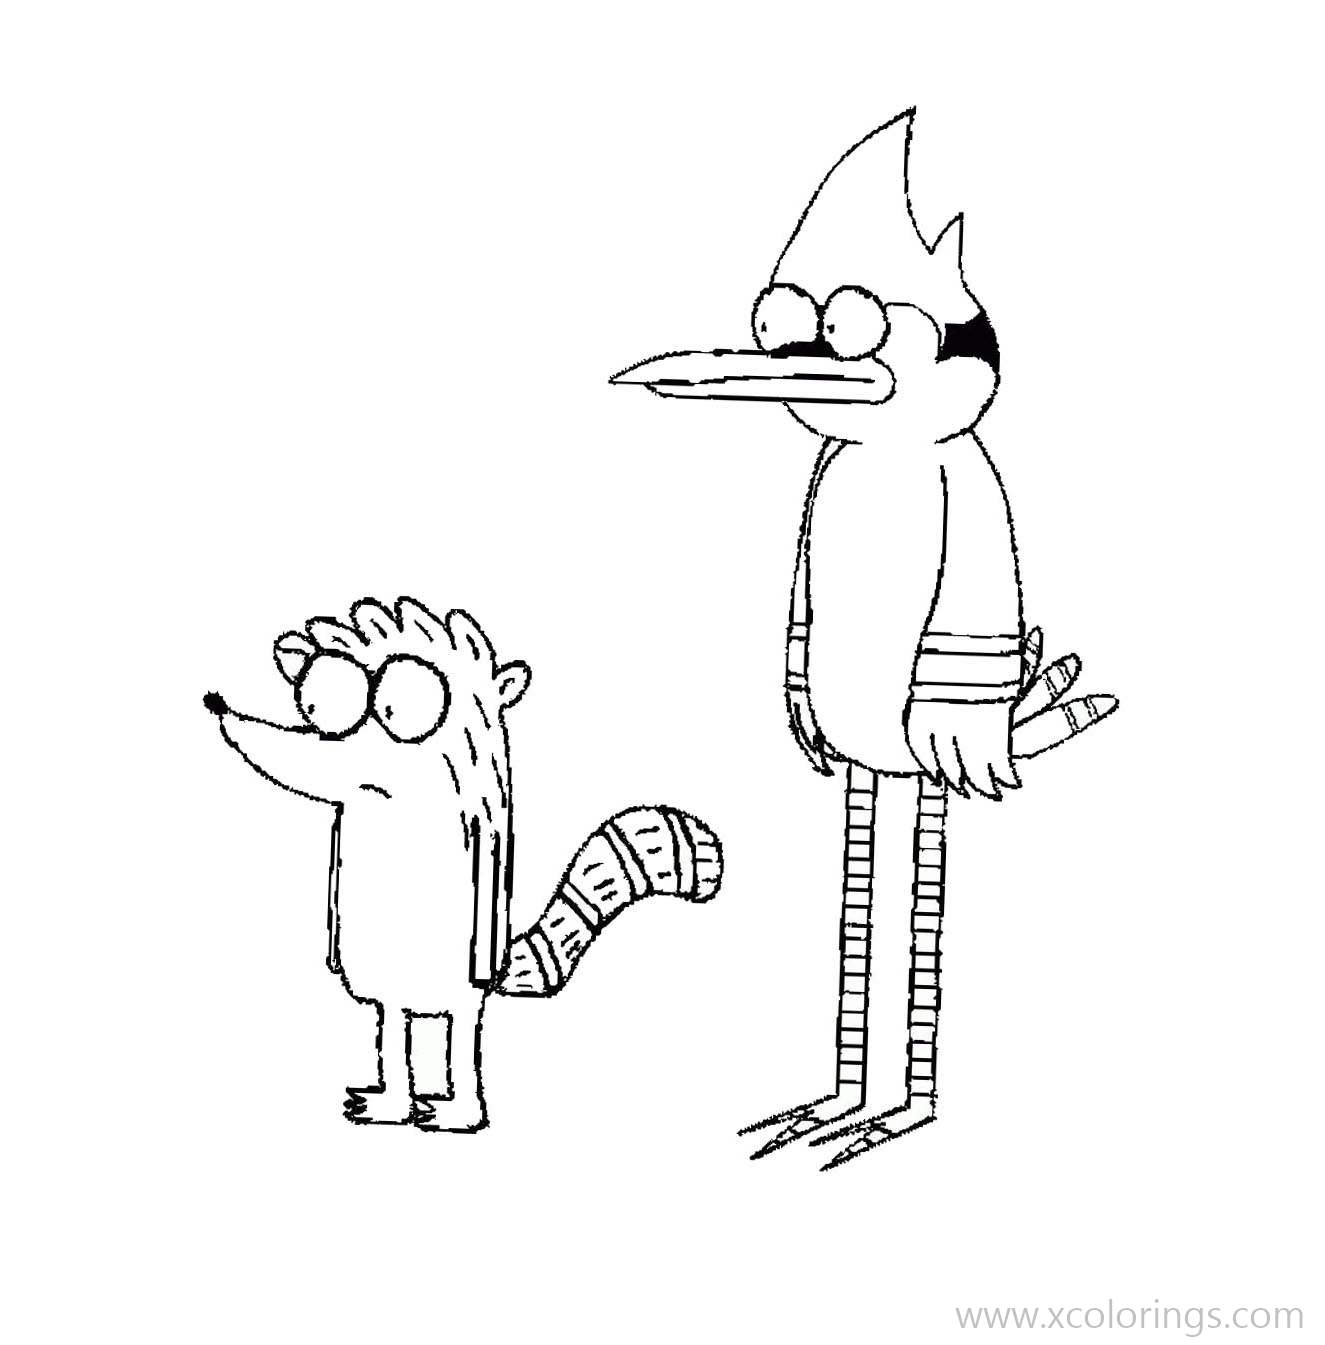 Free Regular Show Coloring Pages Characters Rigby and Mordecai printable